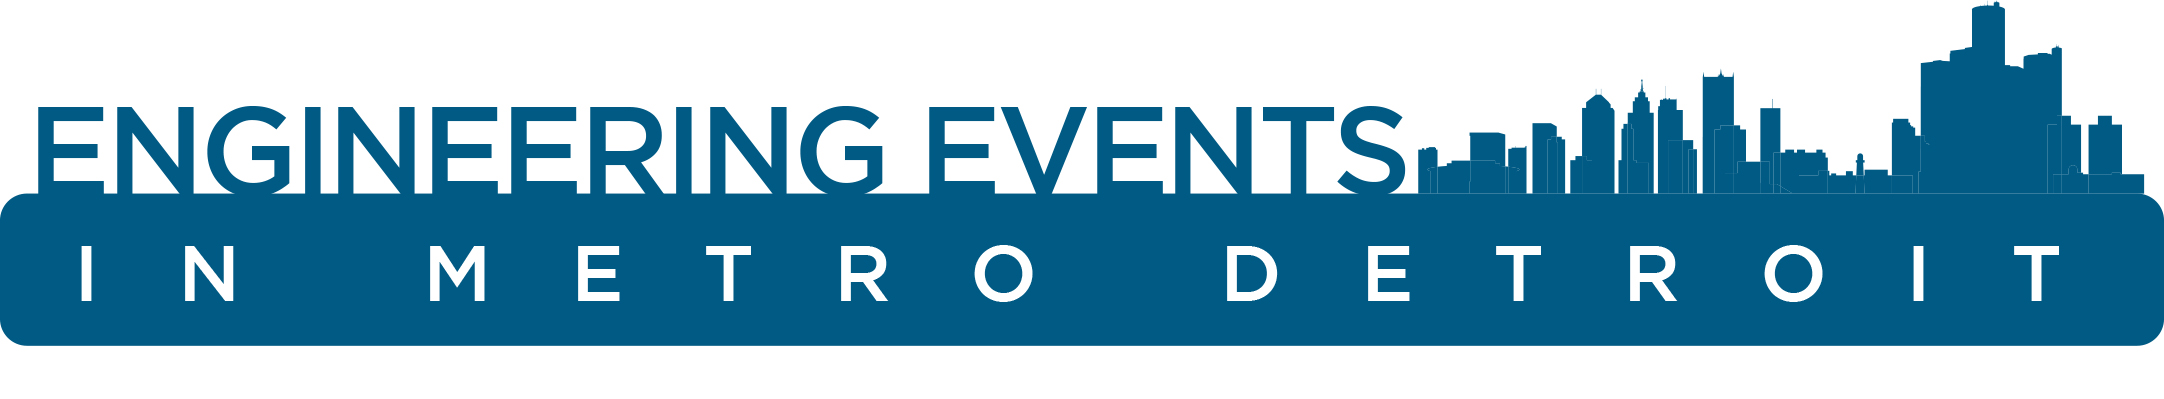 Engineering Events in Detroit